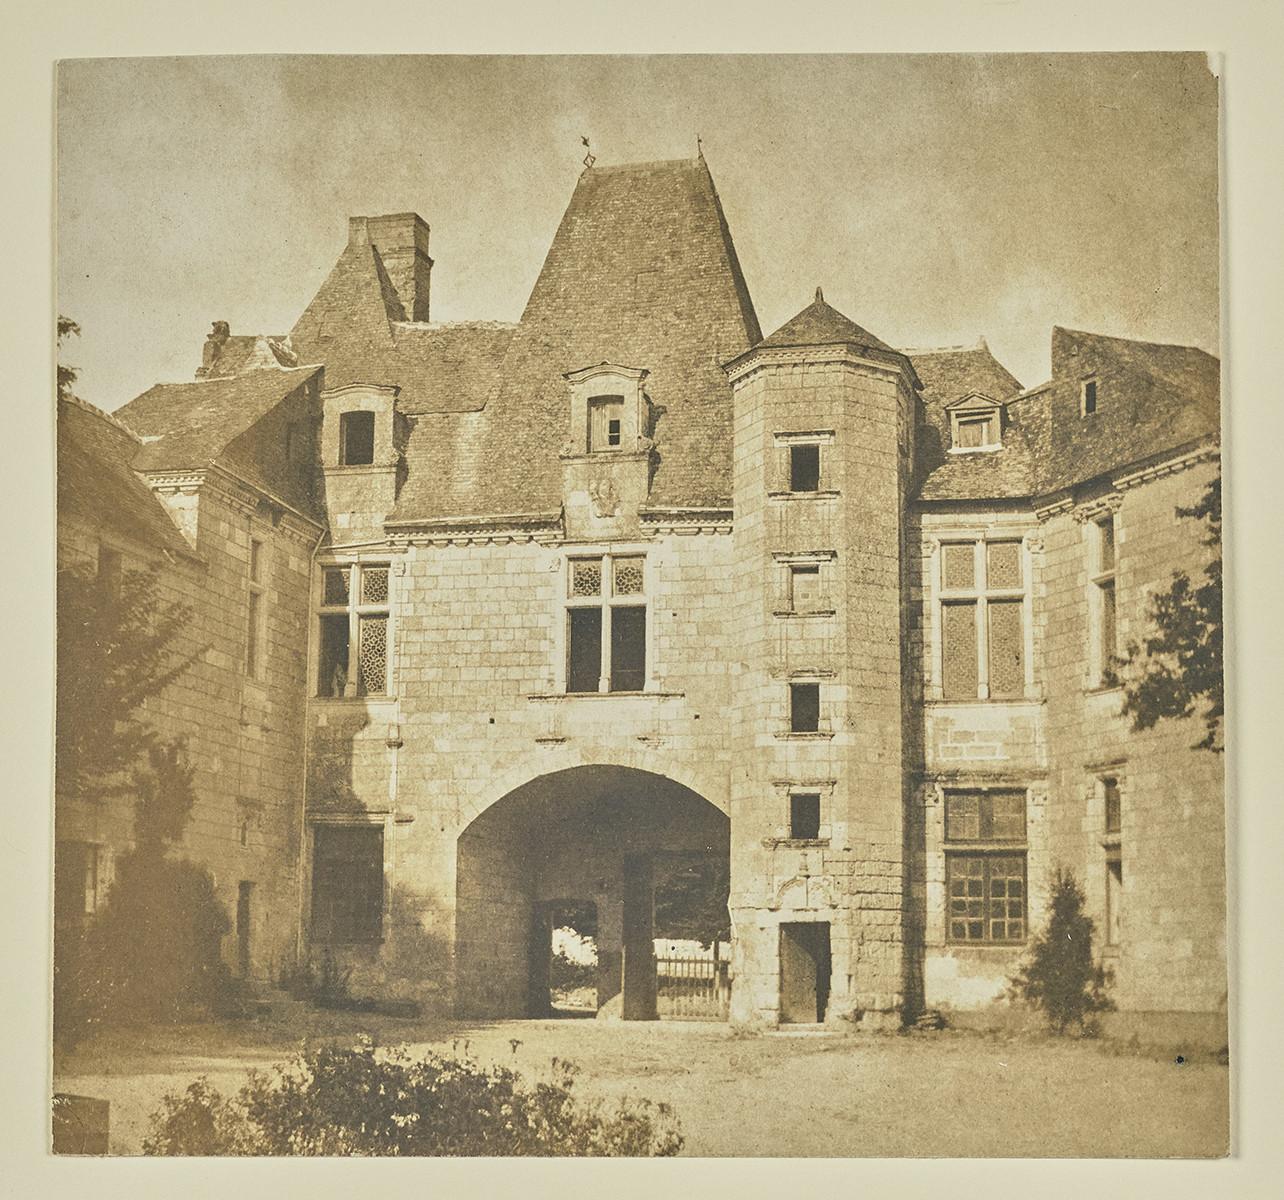 J. Paul Getty Museum : Hippolyte Bayard and the Invention of Photography – The...